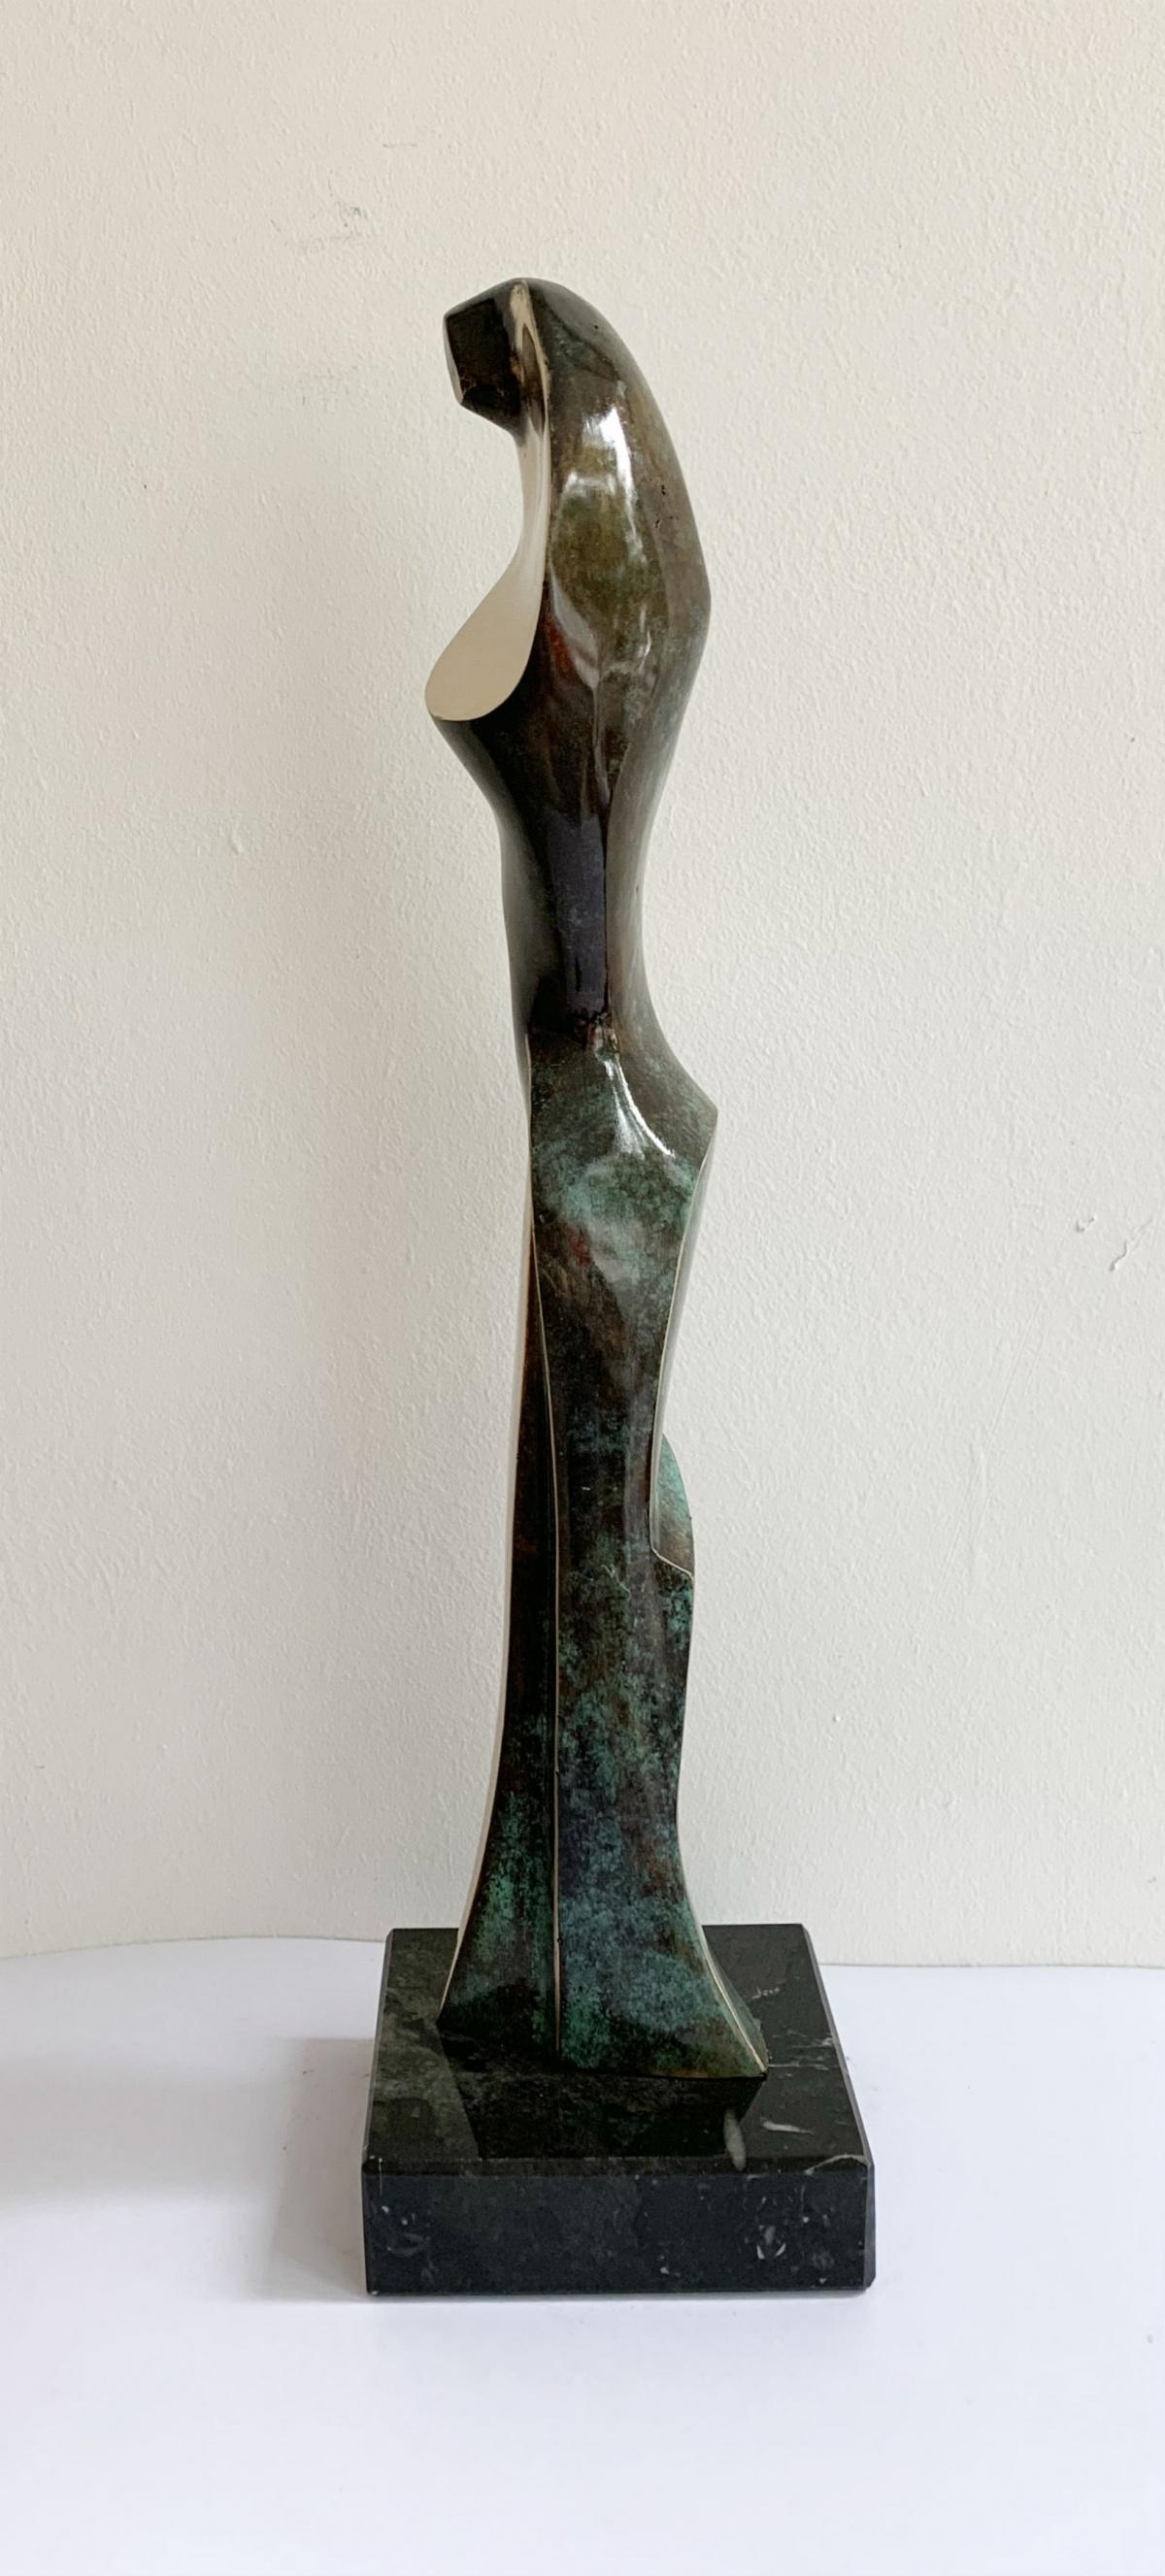 Copy 6 of 8
Dimesnions of sculpture including base

STANISŁAW  WYSOCKI (b. 1949)
Wysocki studied at the Academy of Fine Arts in Poznań (1978-1980) and then at the Hochschule der Kunste in Berlin under prof. J.H. Lonas. He received his diploma in